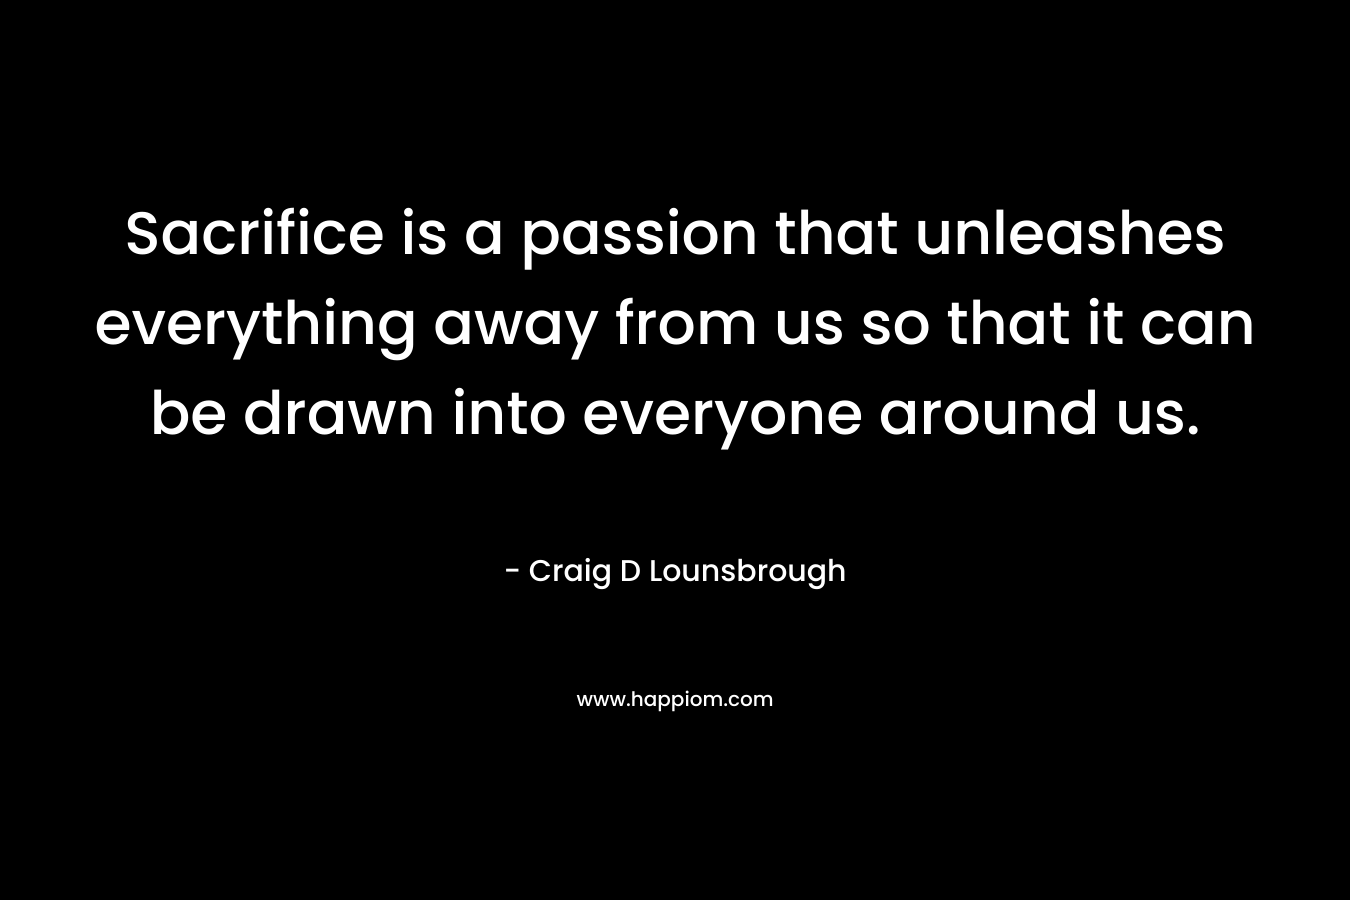 Sacrifice is a passion that unleashes everything away from us so that it can be drawn into everyone around us.